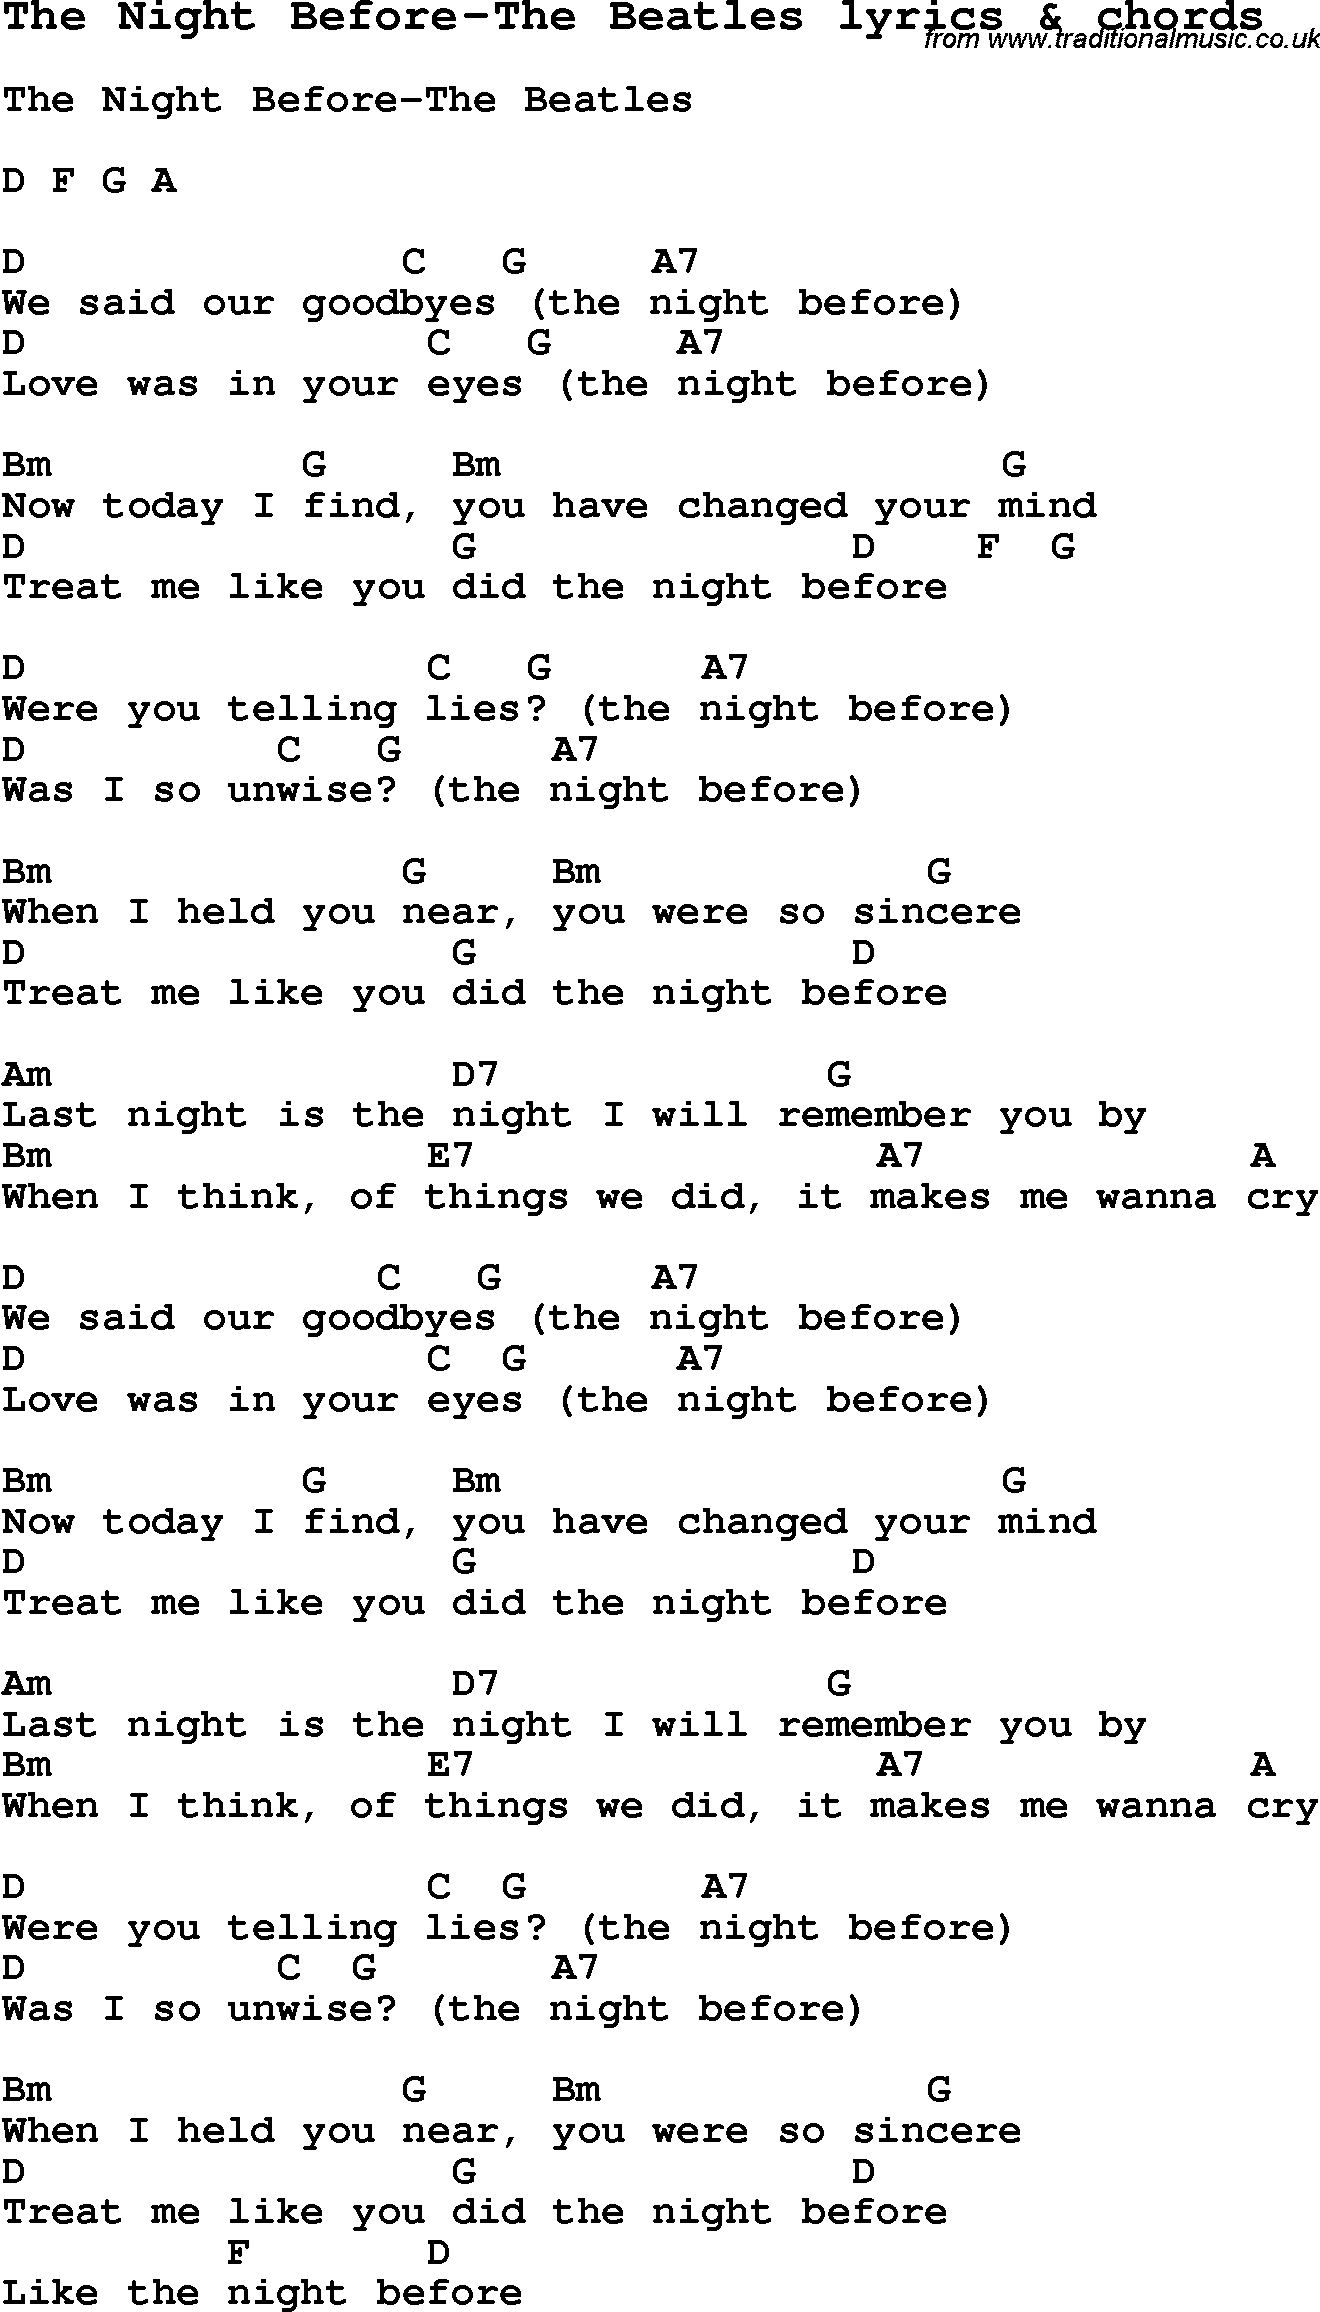 Love Song Lyrics for: The Night Before-The Beatles with chords for Ukulele, Guitar Banjo etc.